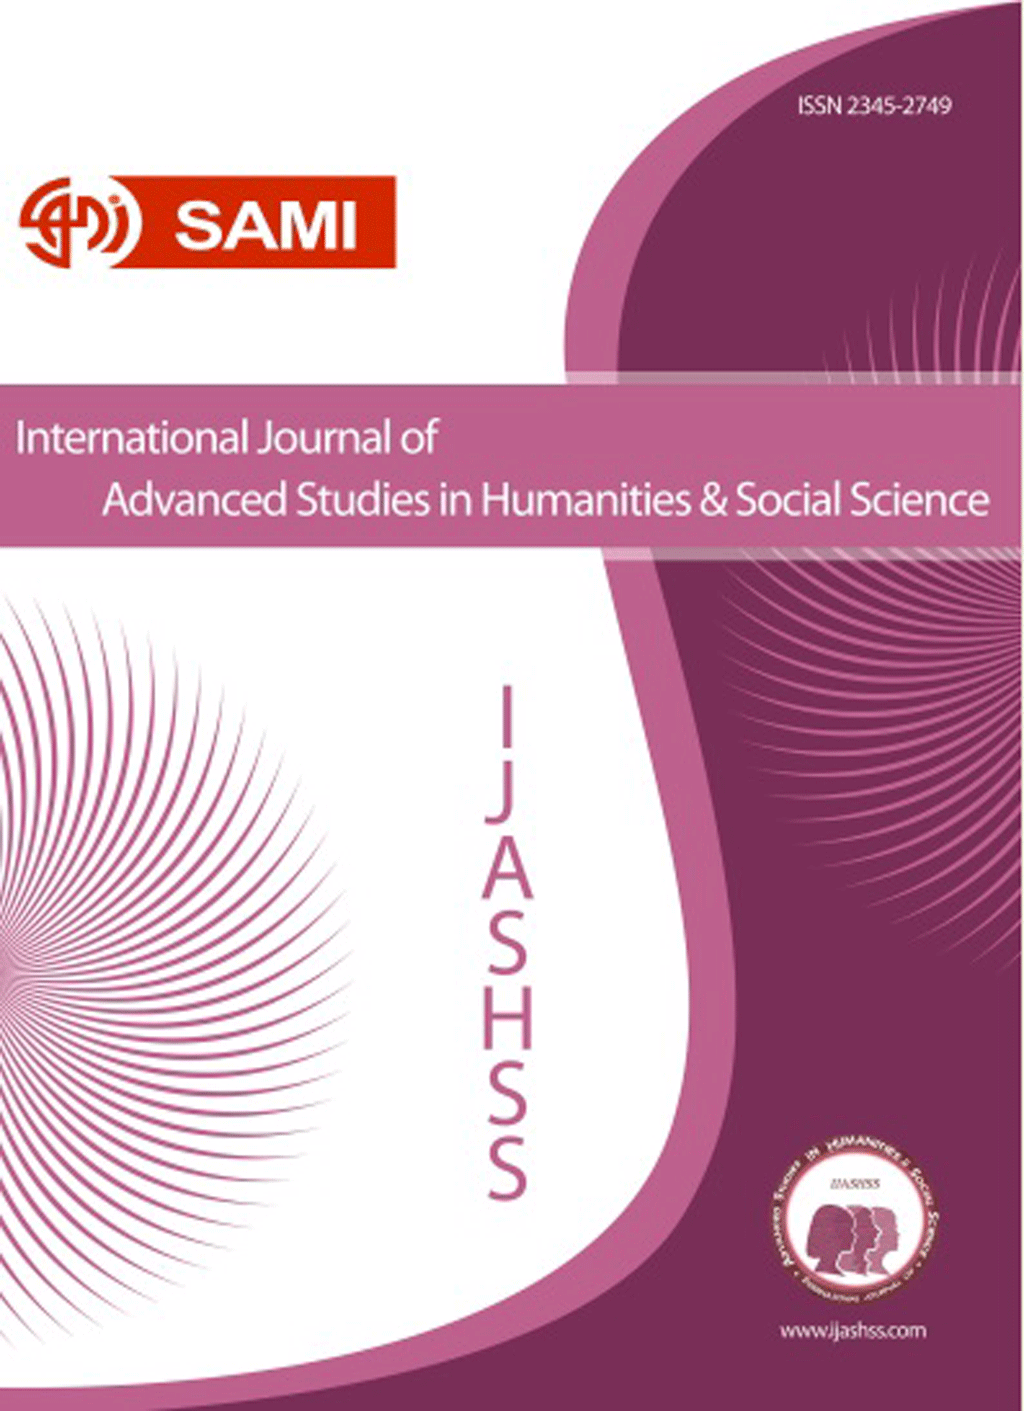 International Journal of Advanced Studies in Humanities and Social Science - April 2022, Volume 11 -  Issue 2